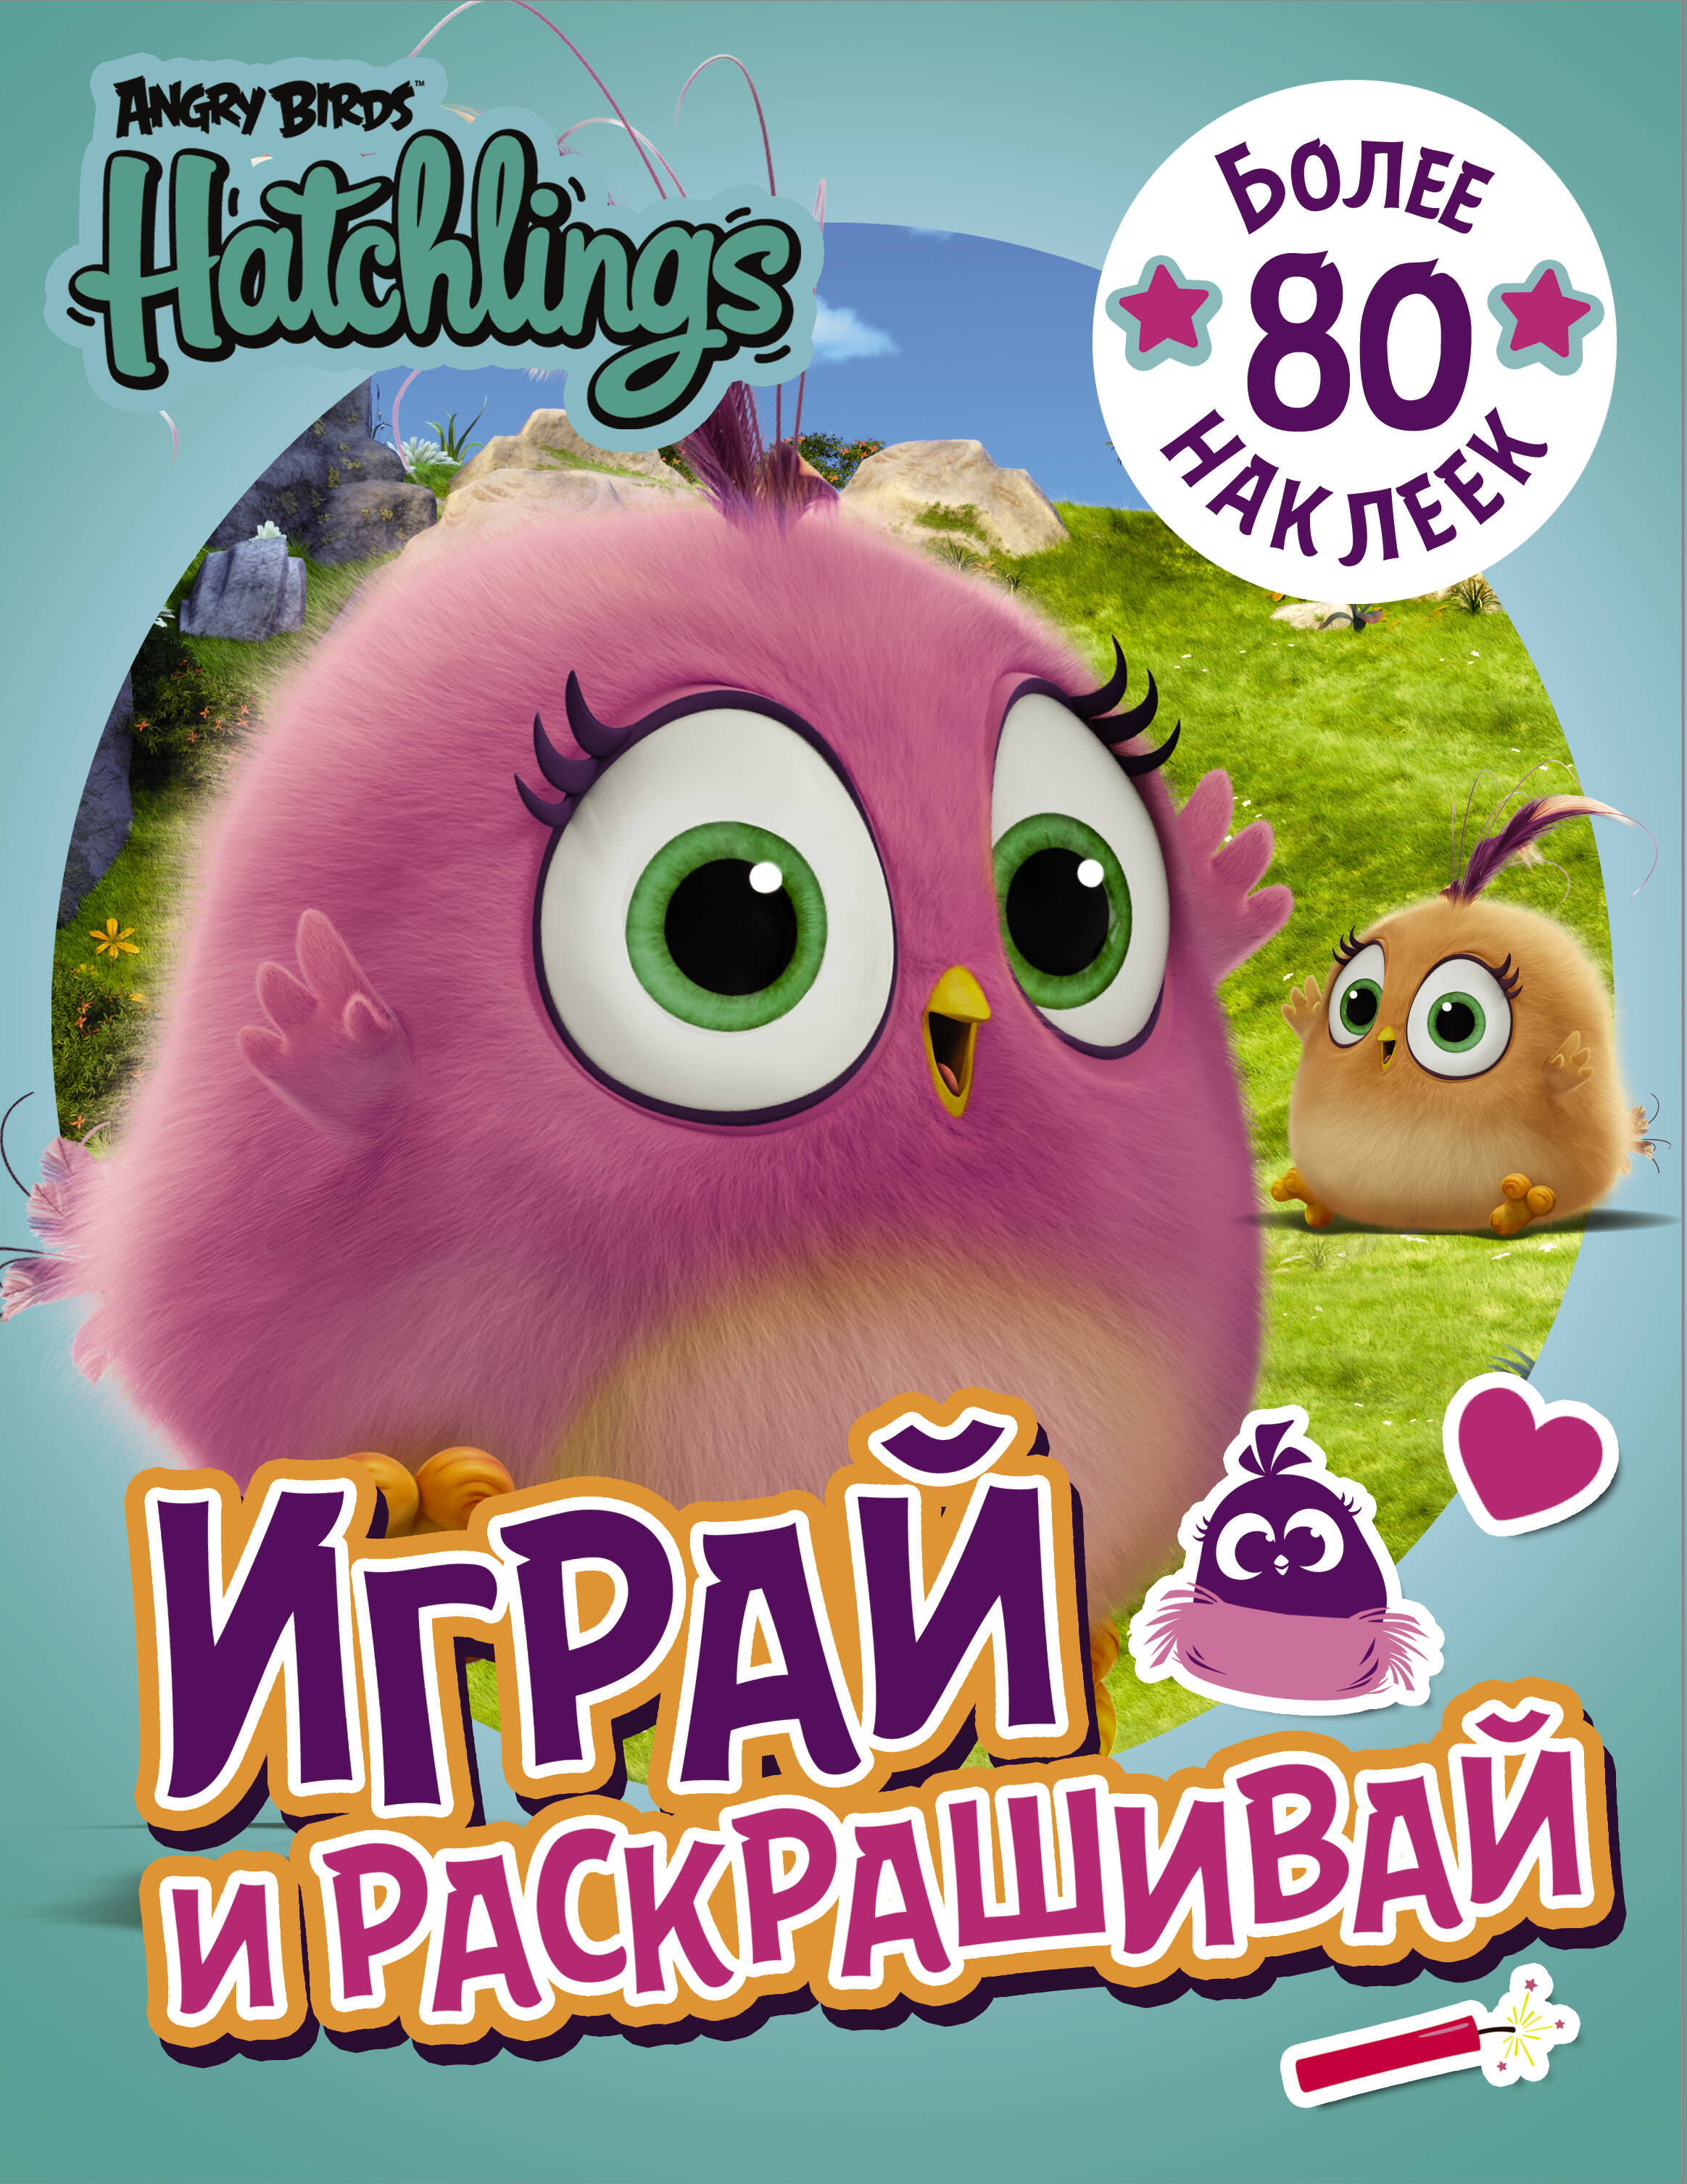 angry birds hatchlings играй и рисуй с наклейками Angry Birds. Hatchlings. Играй и раскрашивай (с наклейками)